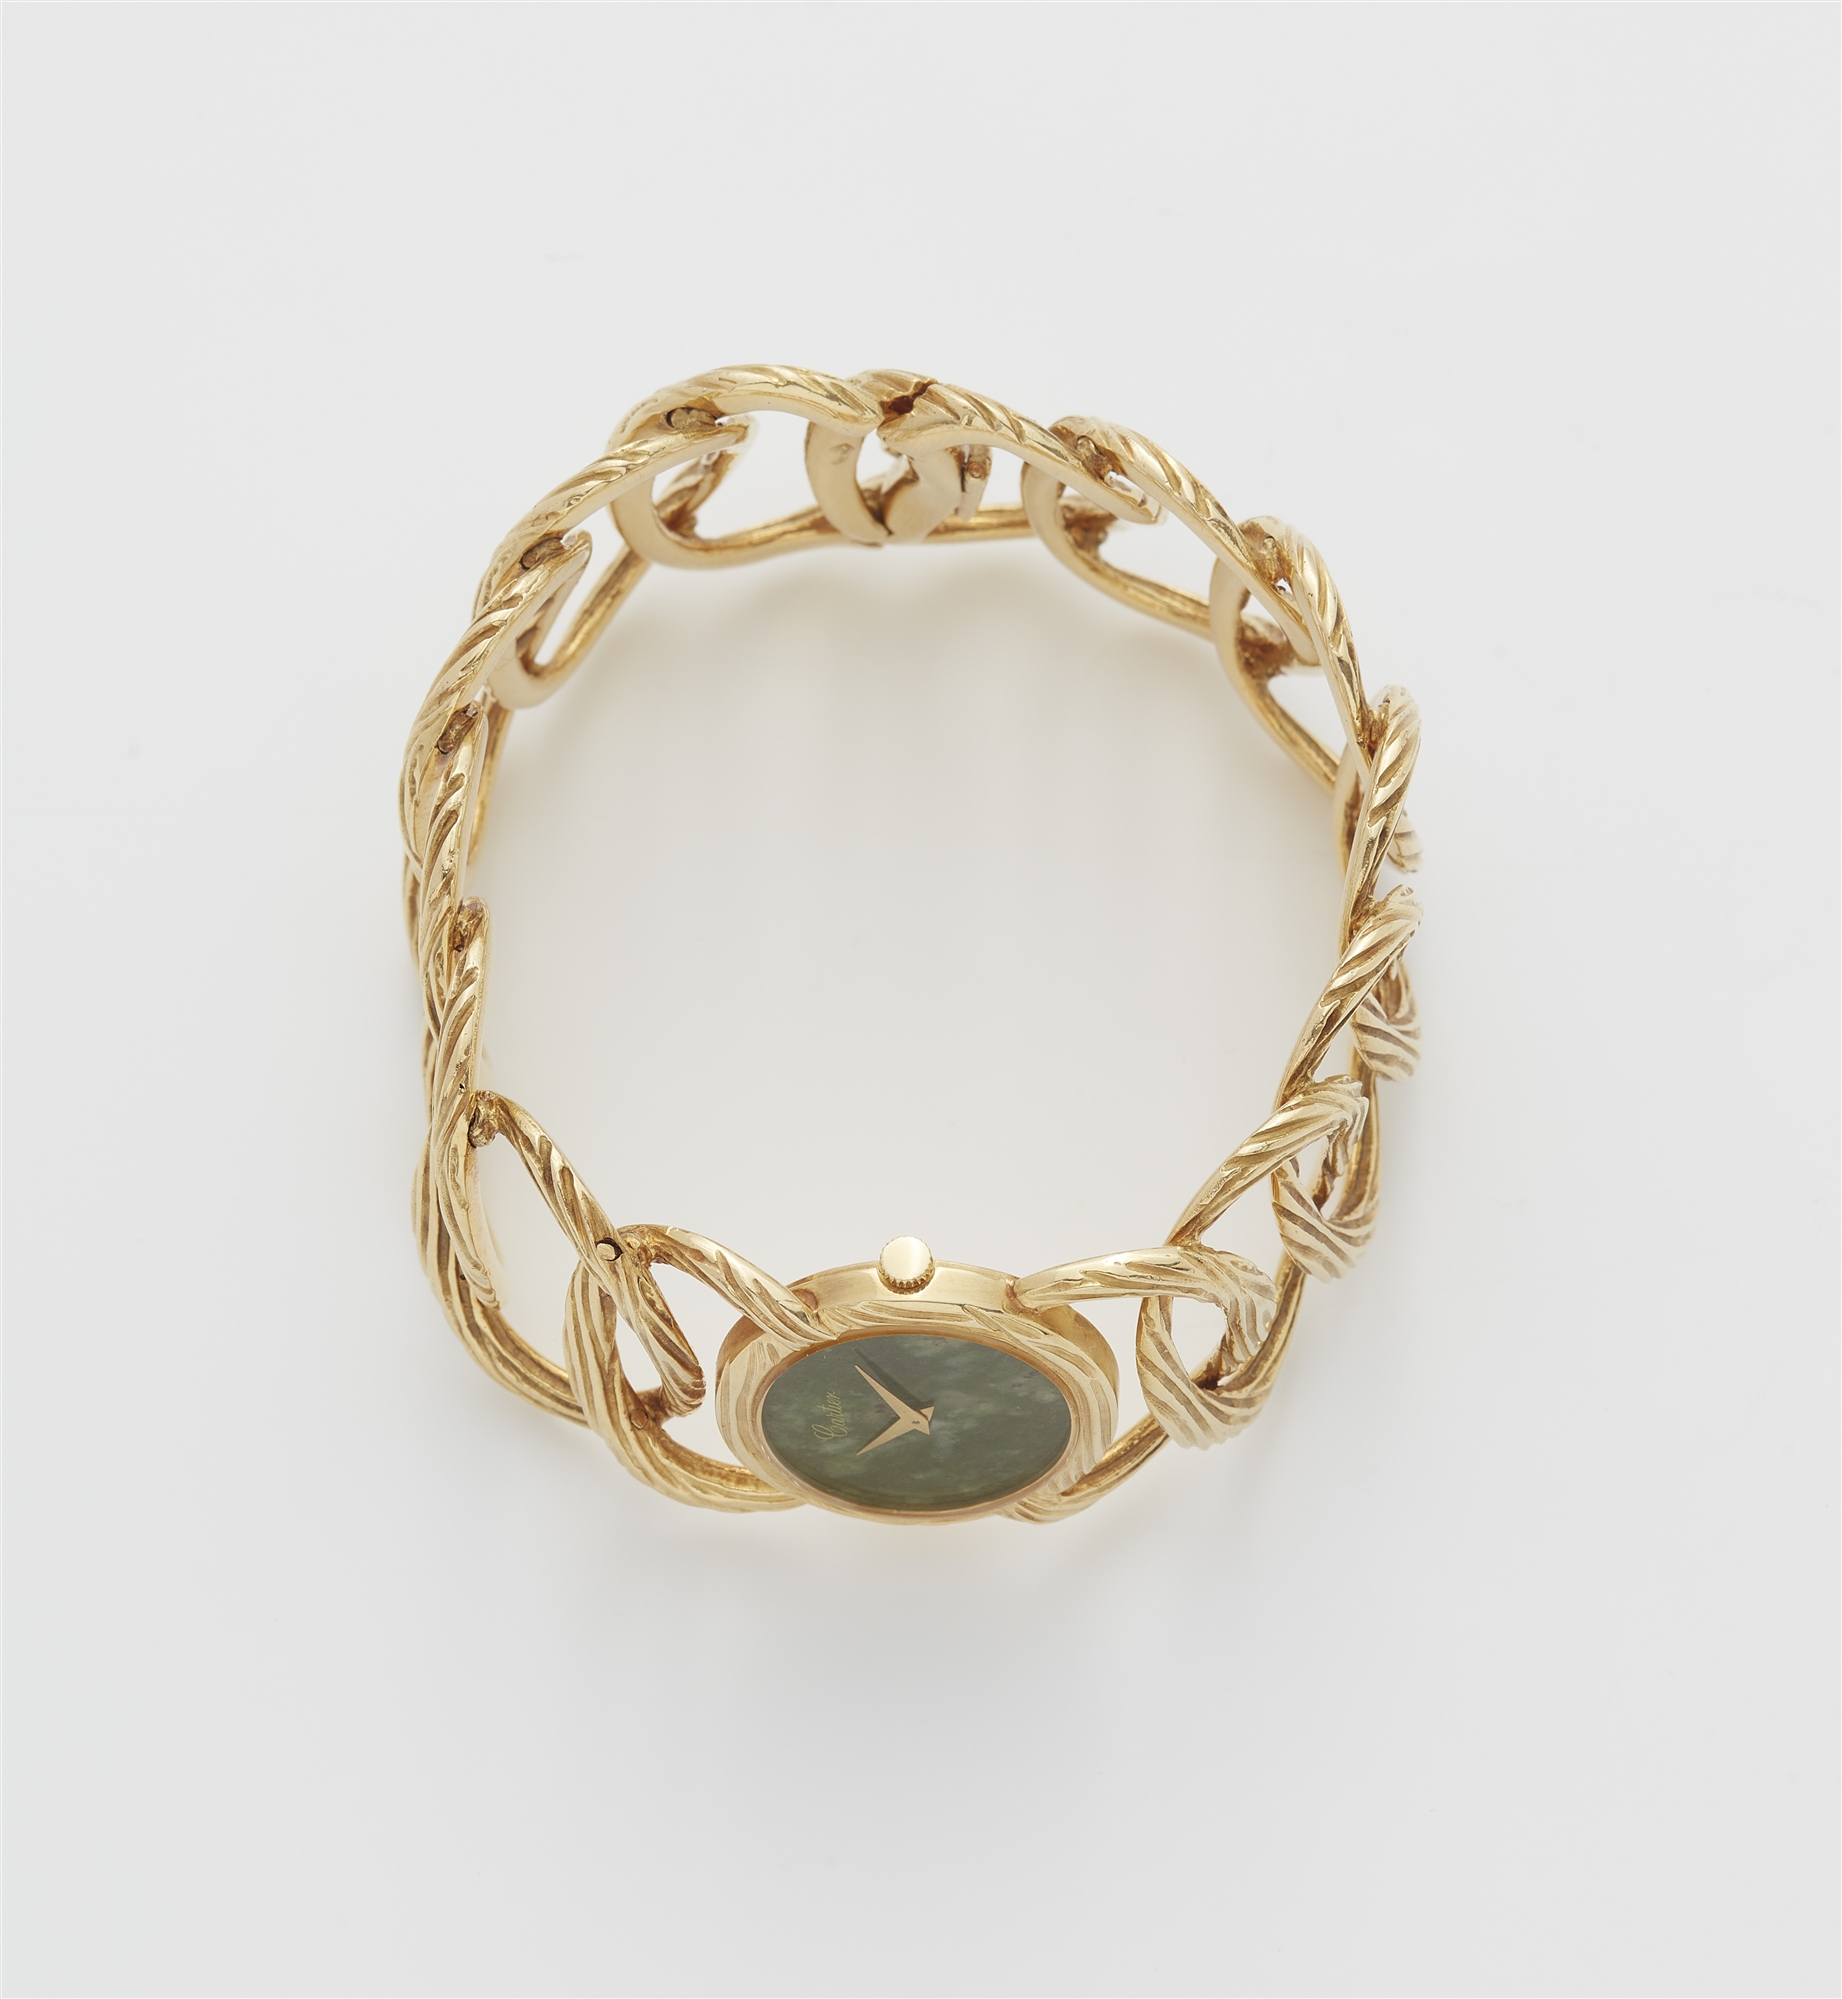 An 18k yellow gold and mottled green nephrite jade ladies' Piaget cuff wristwatch retailed by Cartie - Image 3 of 4